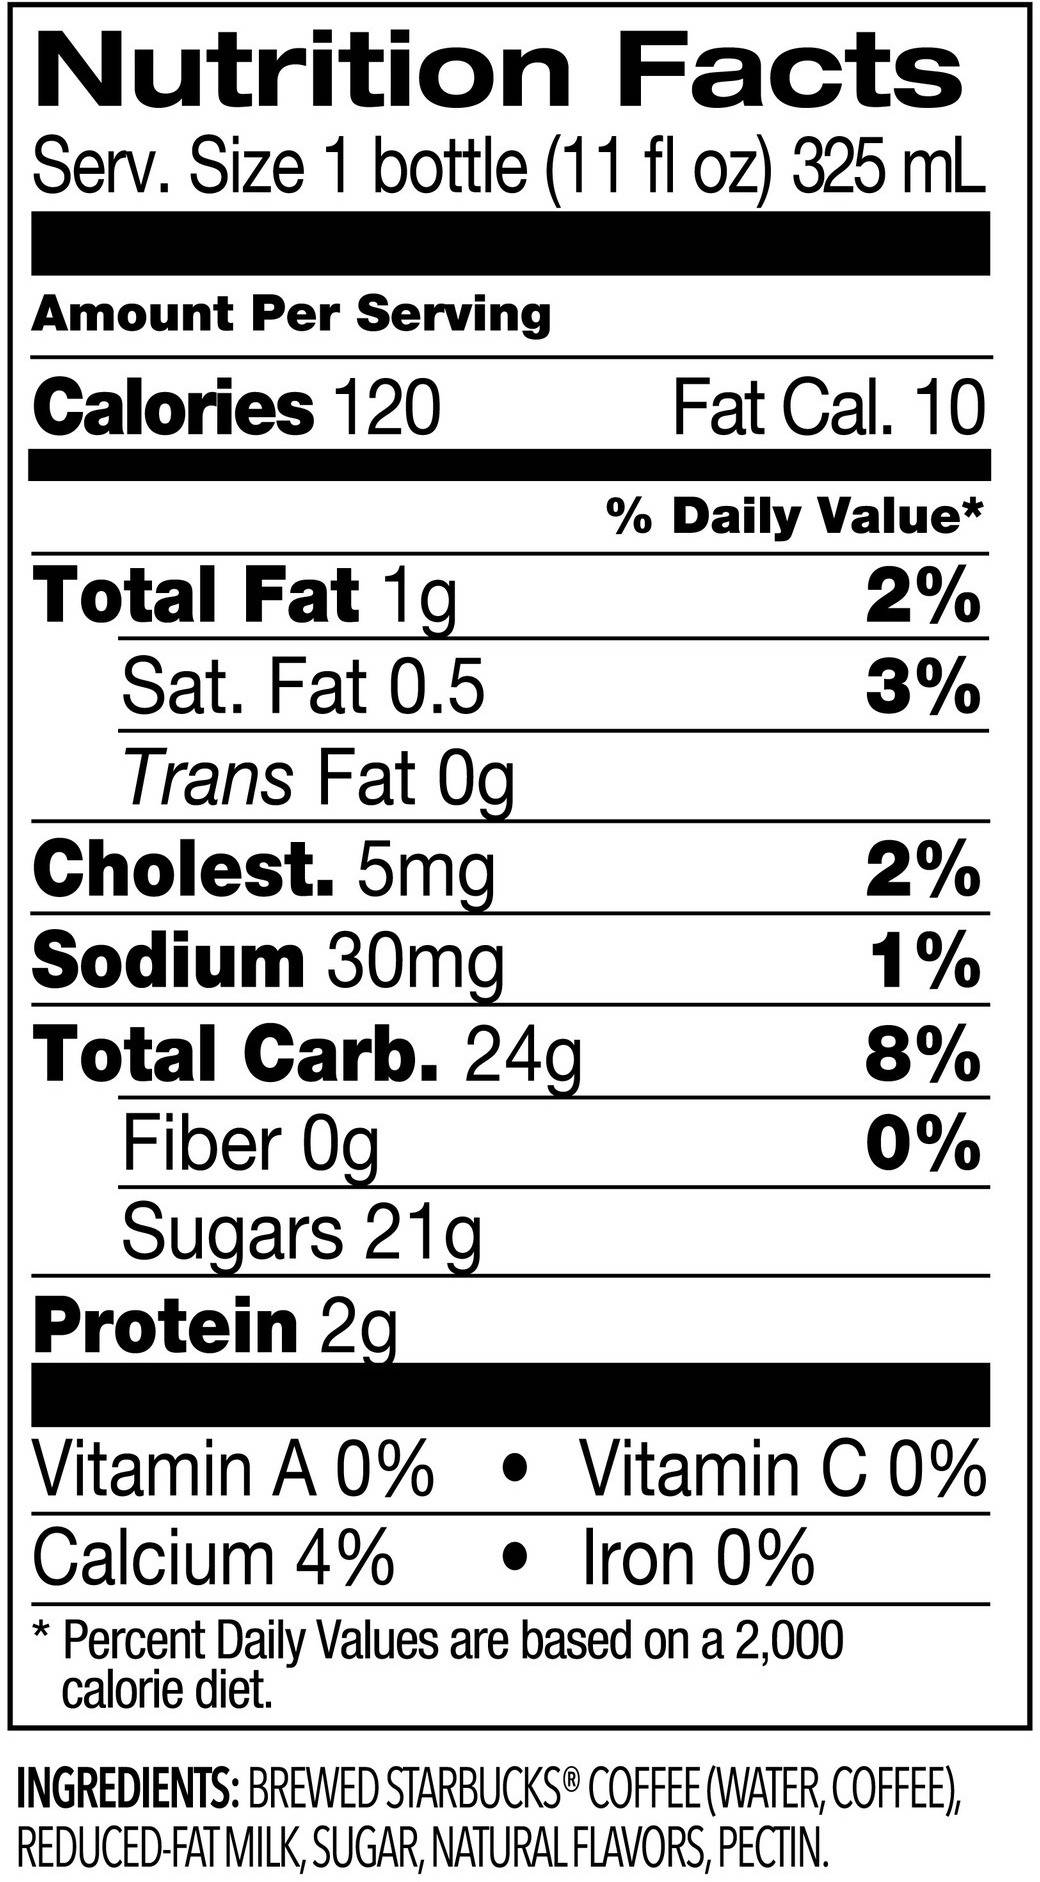 Image describing nutrition information for product Starbucks Iced Coffee Vanilla